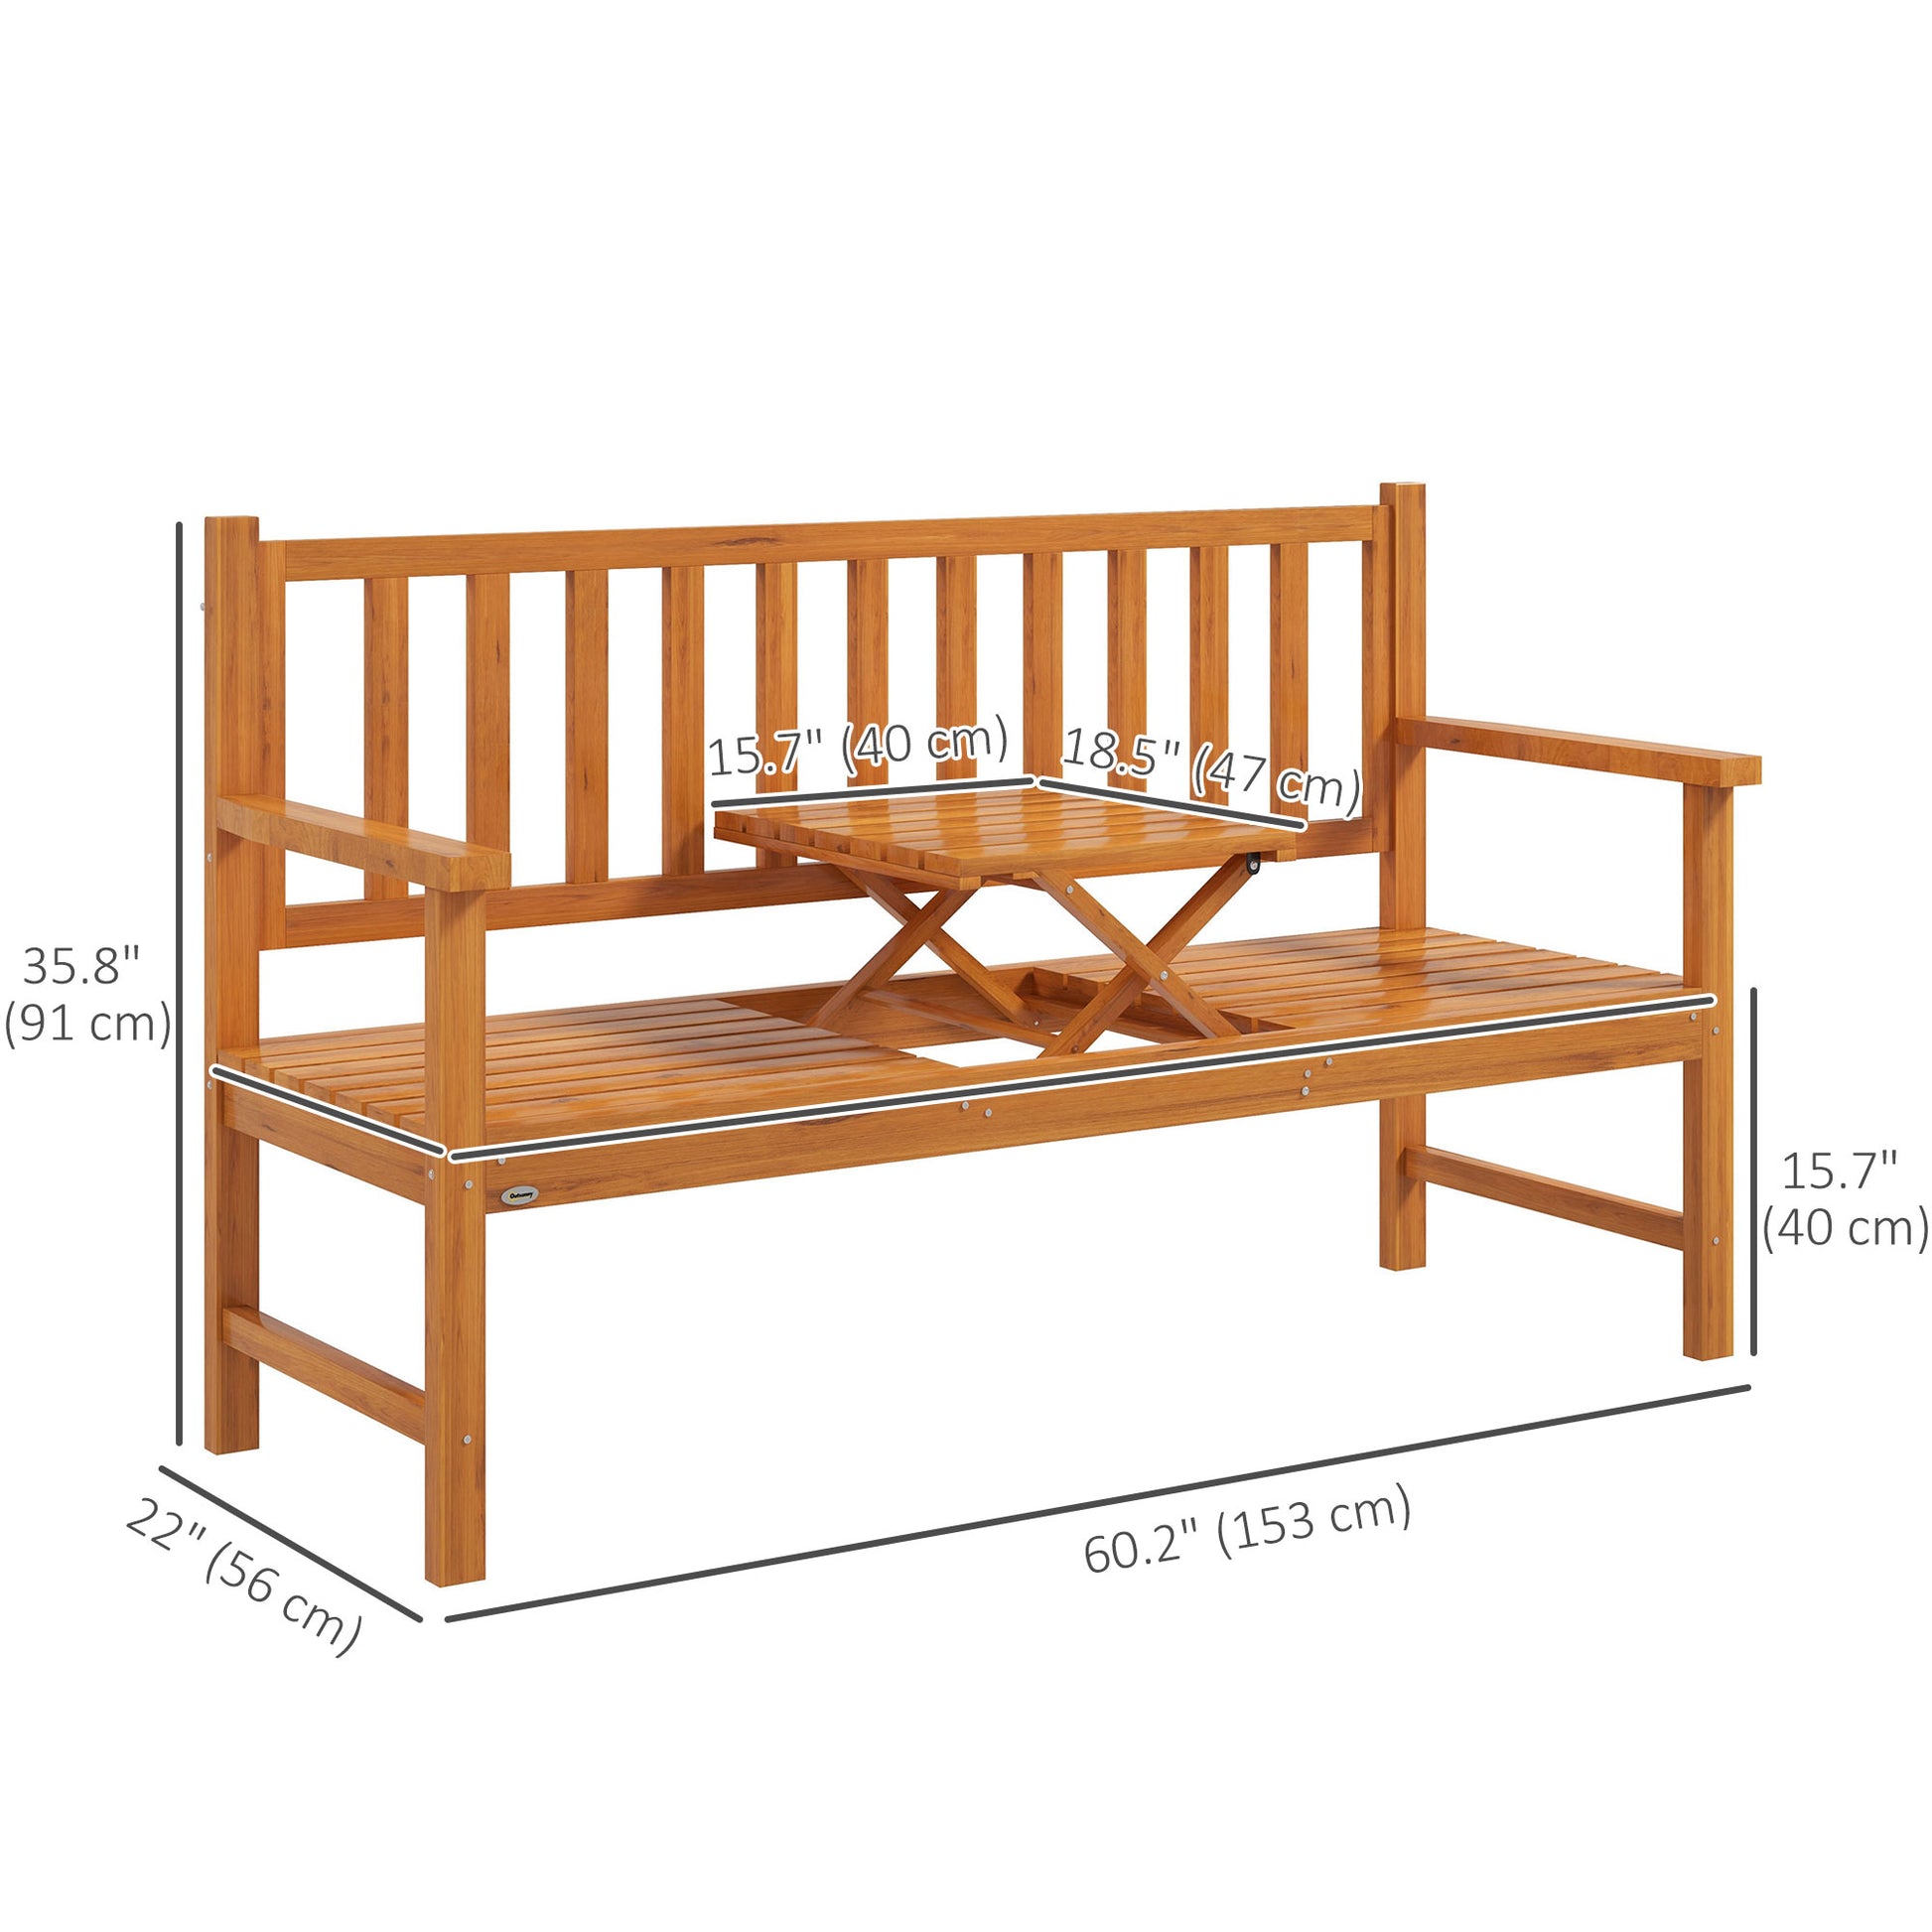 Wooden Bench with Liftable Middle Table, Outdoor Bench, Patio Loveseat for Porch, Backyard, Seats 2-3 People - Gallery Canada